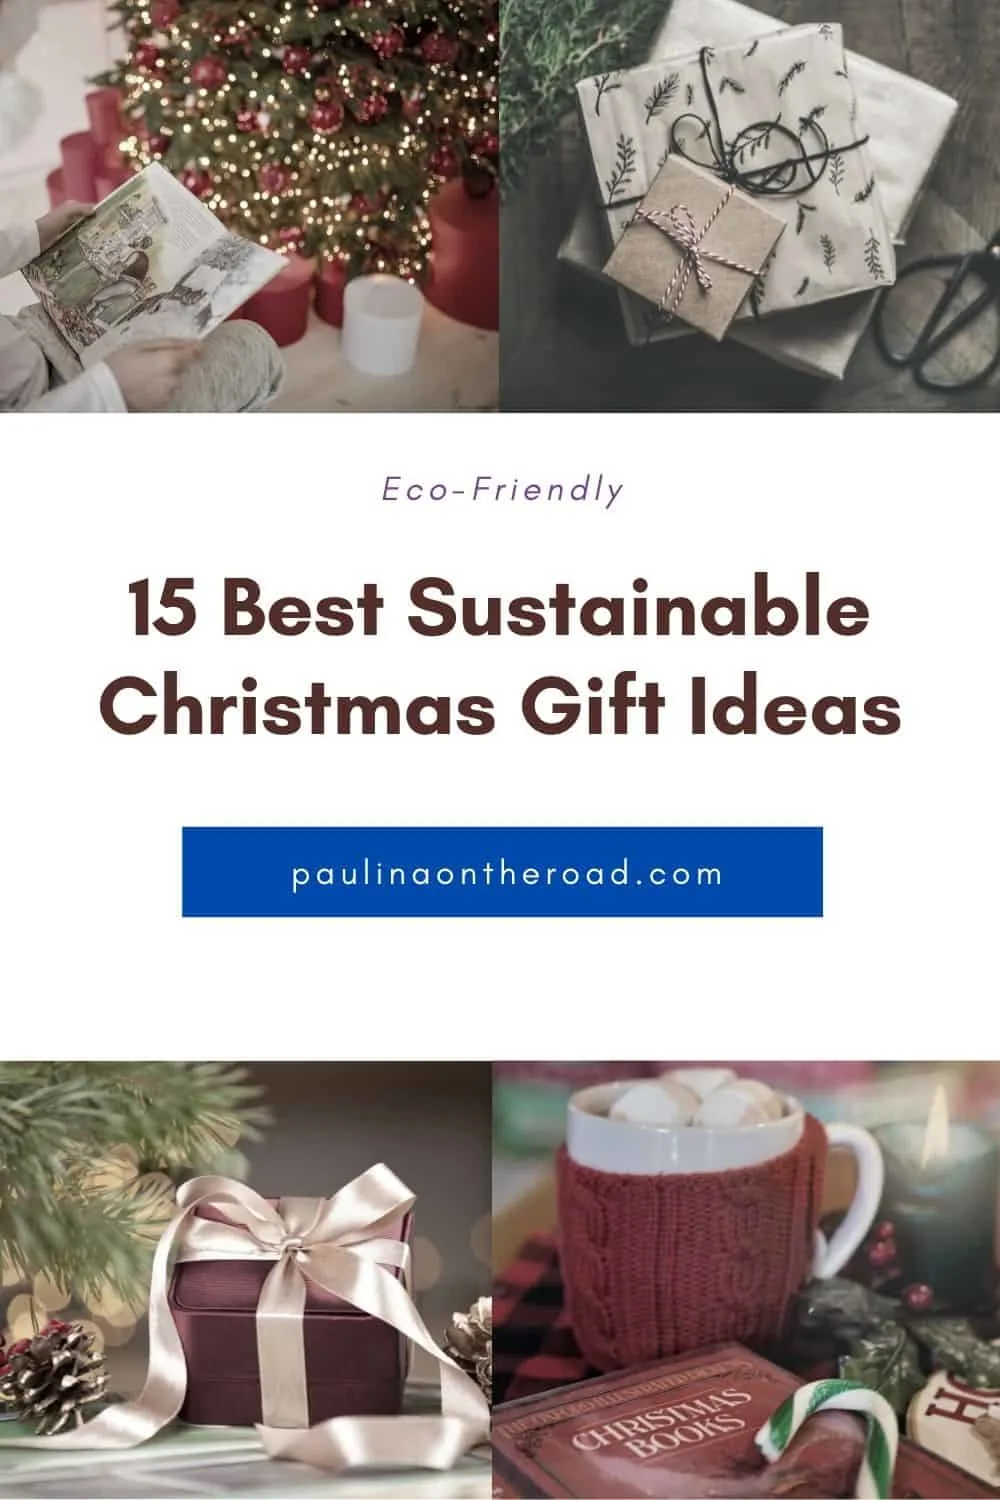 Are you looking for eco-friendly Christmas gift ideas for your friends and family this holiday season? This guide has some of the best places to buy sustainable Christmas gifts for a range of budgets and interests. You'll find sustainable jewelry and clothing options, equipment for their favorite hobbies and great secret Santa gift ideas #Christmas #Sustainability #SustainableChristmasGifts #SustainableChristmas #ChristmasGifts #EcoFriendly #Sustainability #Xmas #ChristmasIdeas #SaveThePlanet